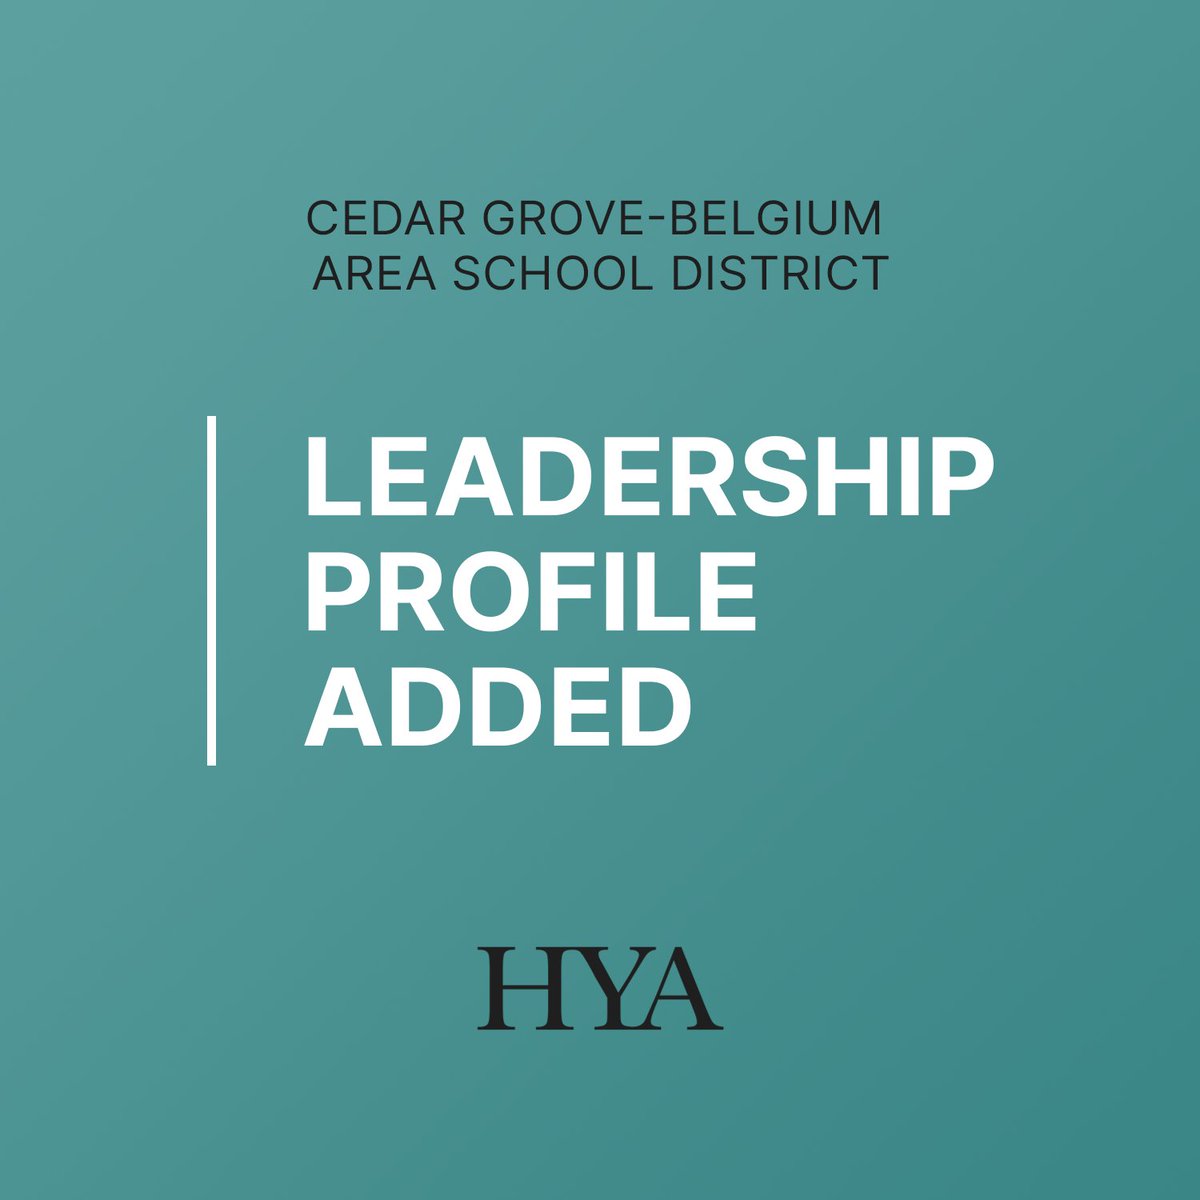 #Superintendent Cedar Grove-Belgium Area School District, WI | Read the Leadership Profile Report: bit.ly/4afv1aK

#HYAsearch #Education #Jobs #EducationJobs #suptchat #edleadership #edadmin #community